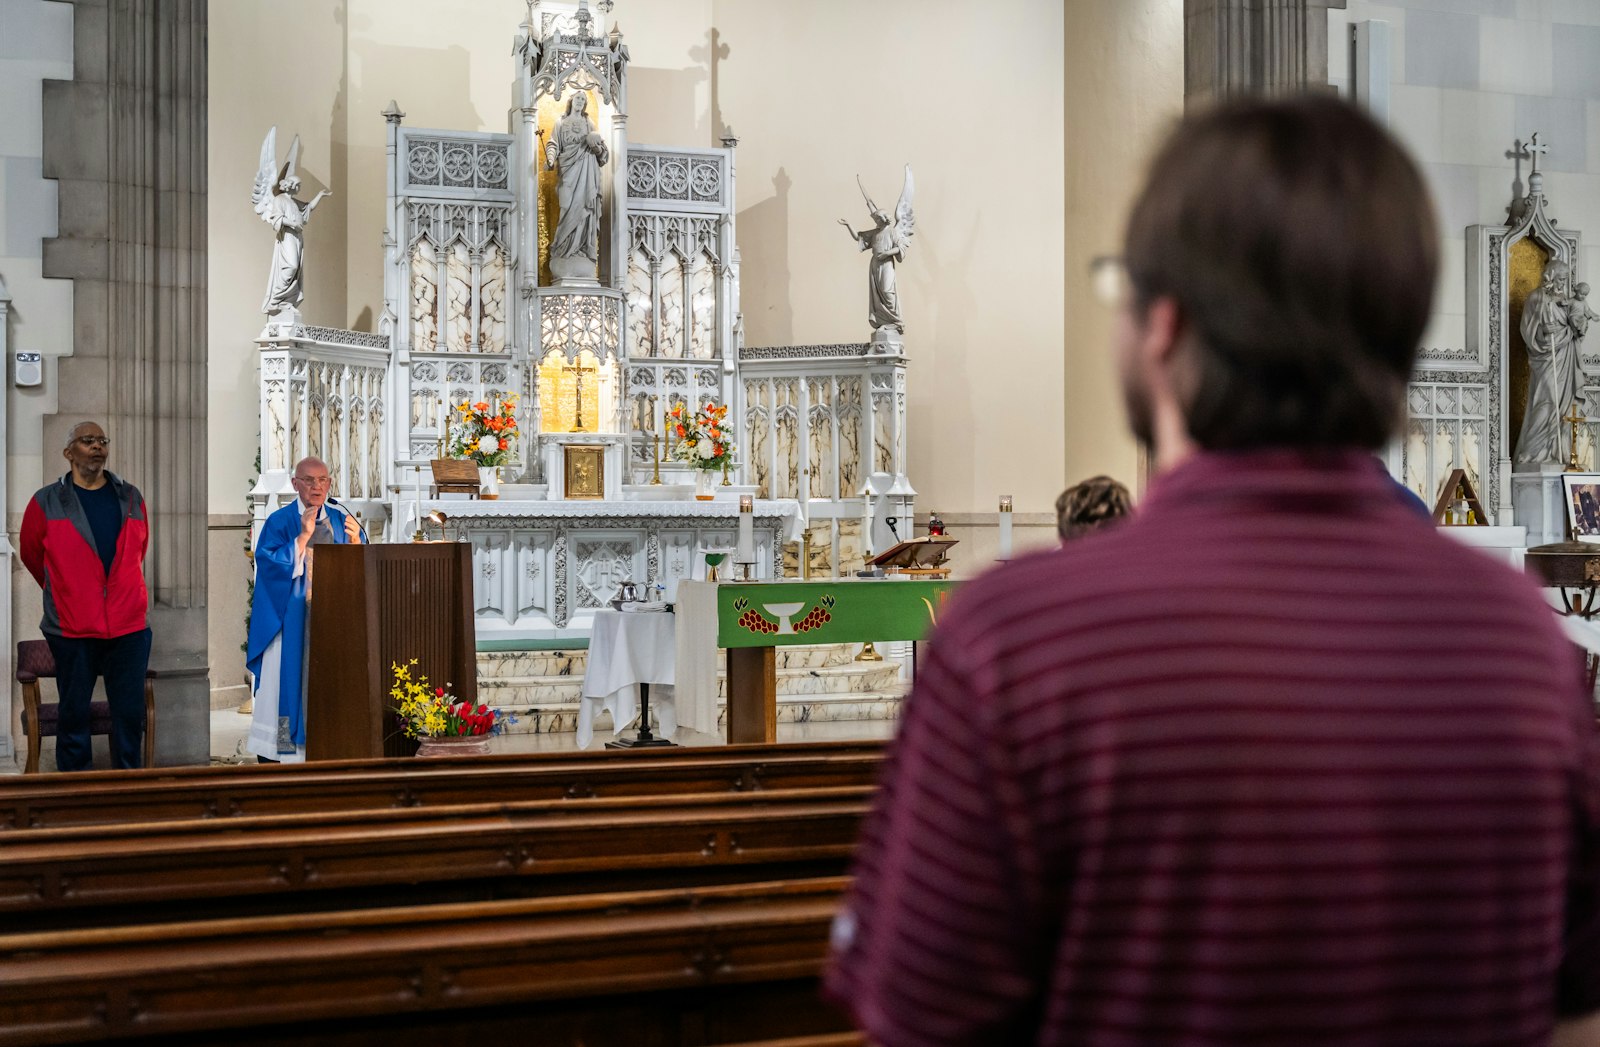 Schuelke attends Mass at Sacred Heart Chapel at the site of the former Marygrove College on Aug. 15. After Mass, Schuelke said clergy and parishioners warmly greeted him, an experience that left a positive impression he hopes to take back to his own parish.